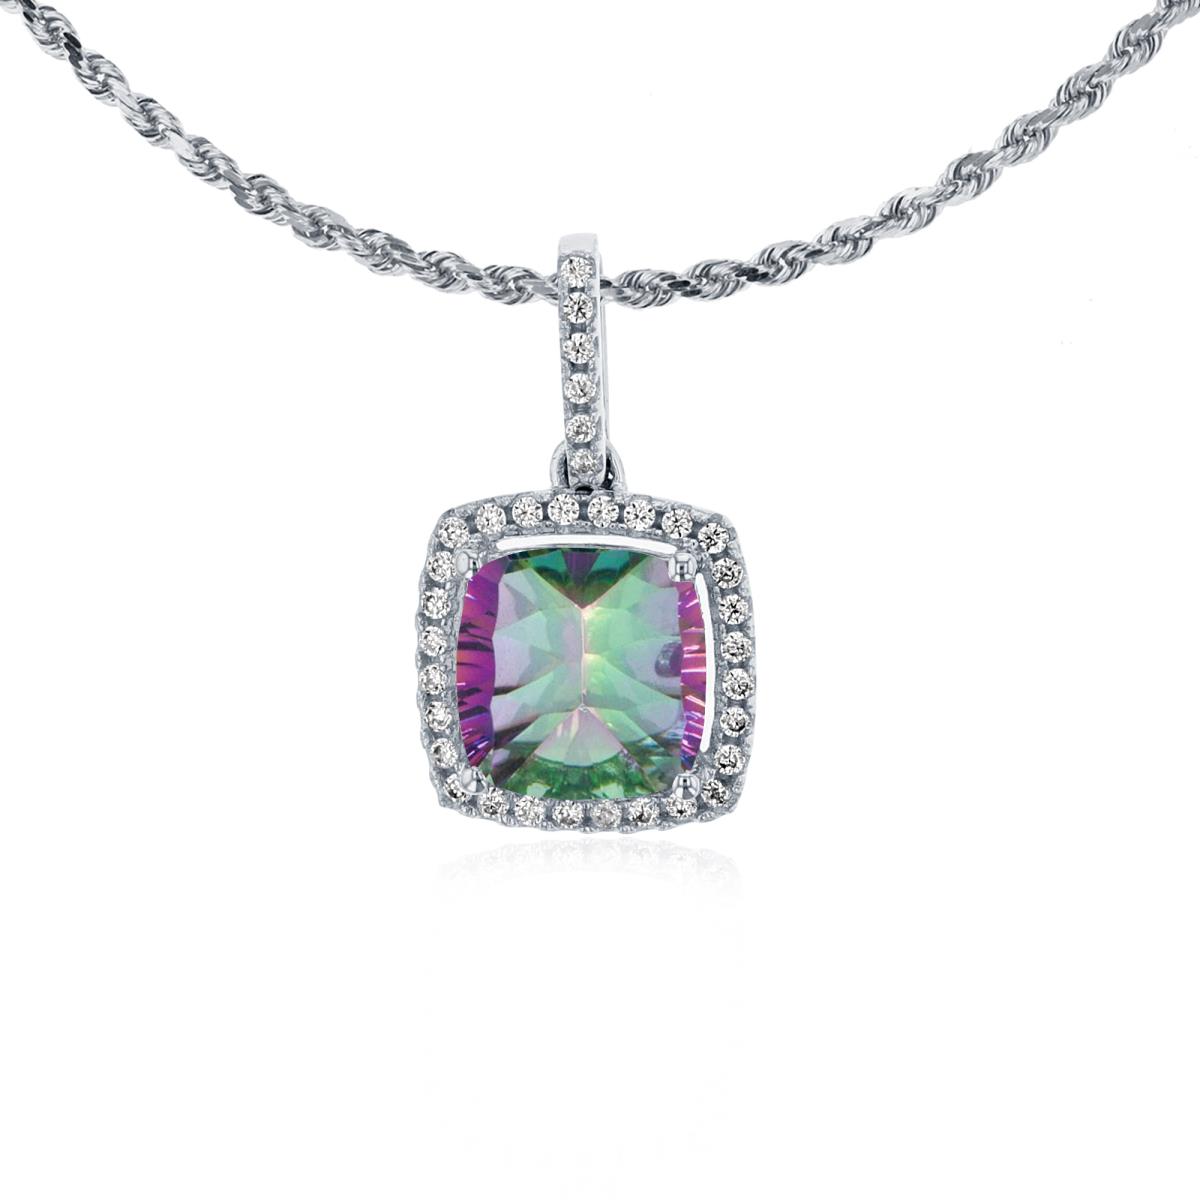 10K White Gold 7mm Cushion Mystic Green Topaz & 0.14 CTTW Rnd Diamond Halo 18" Rope Chain Necklace